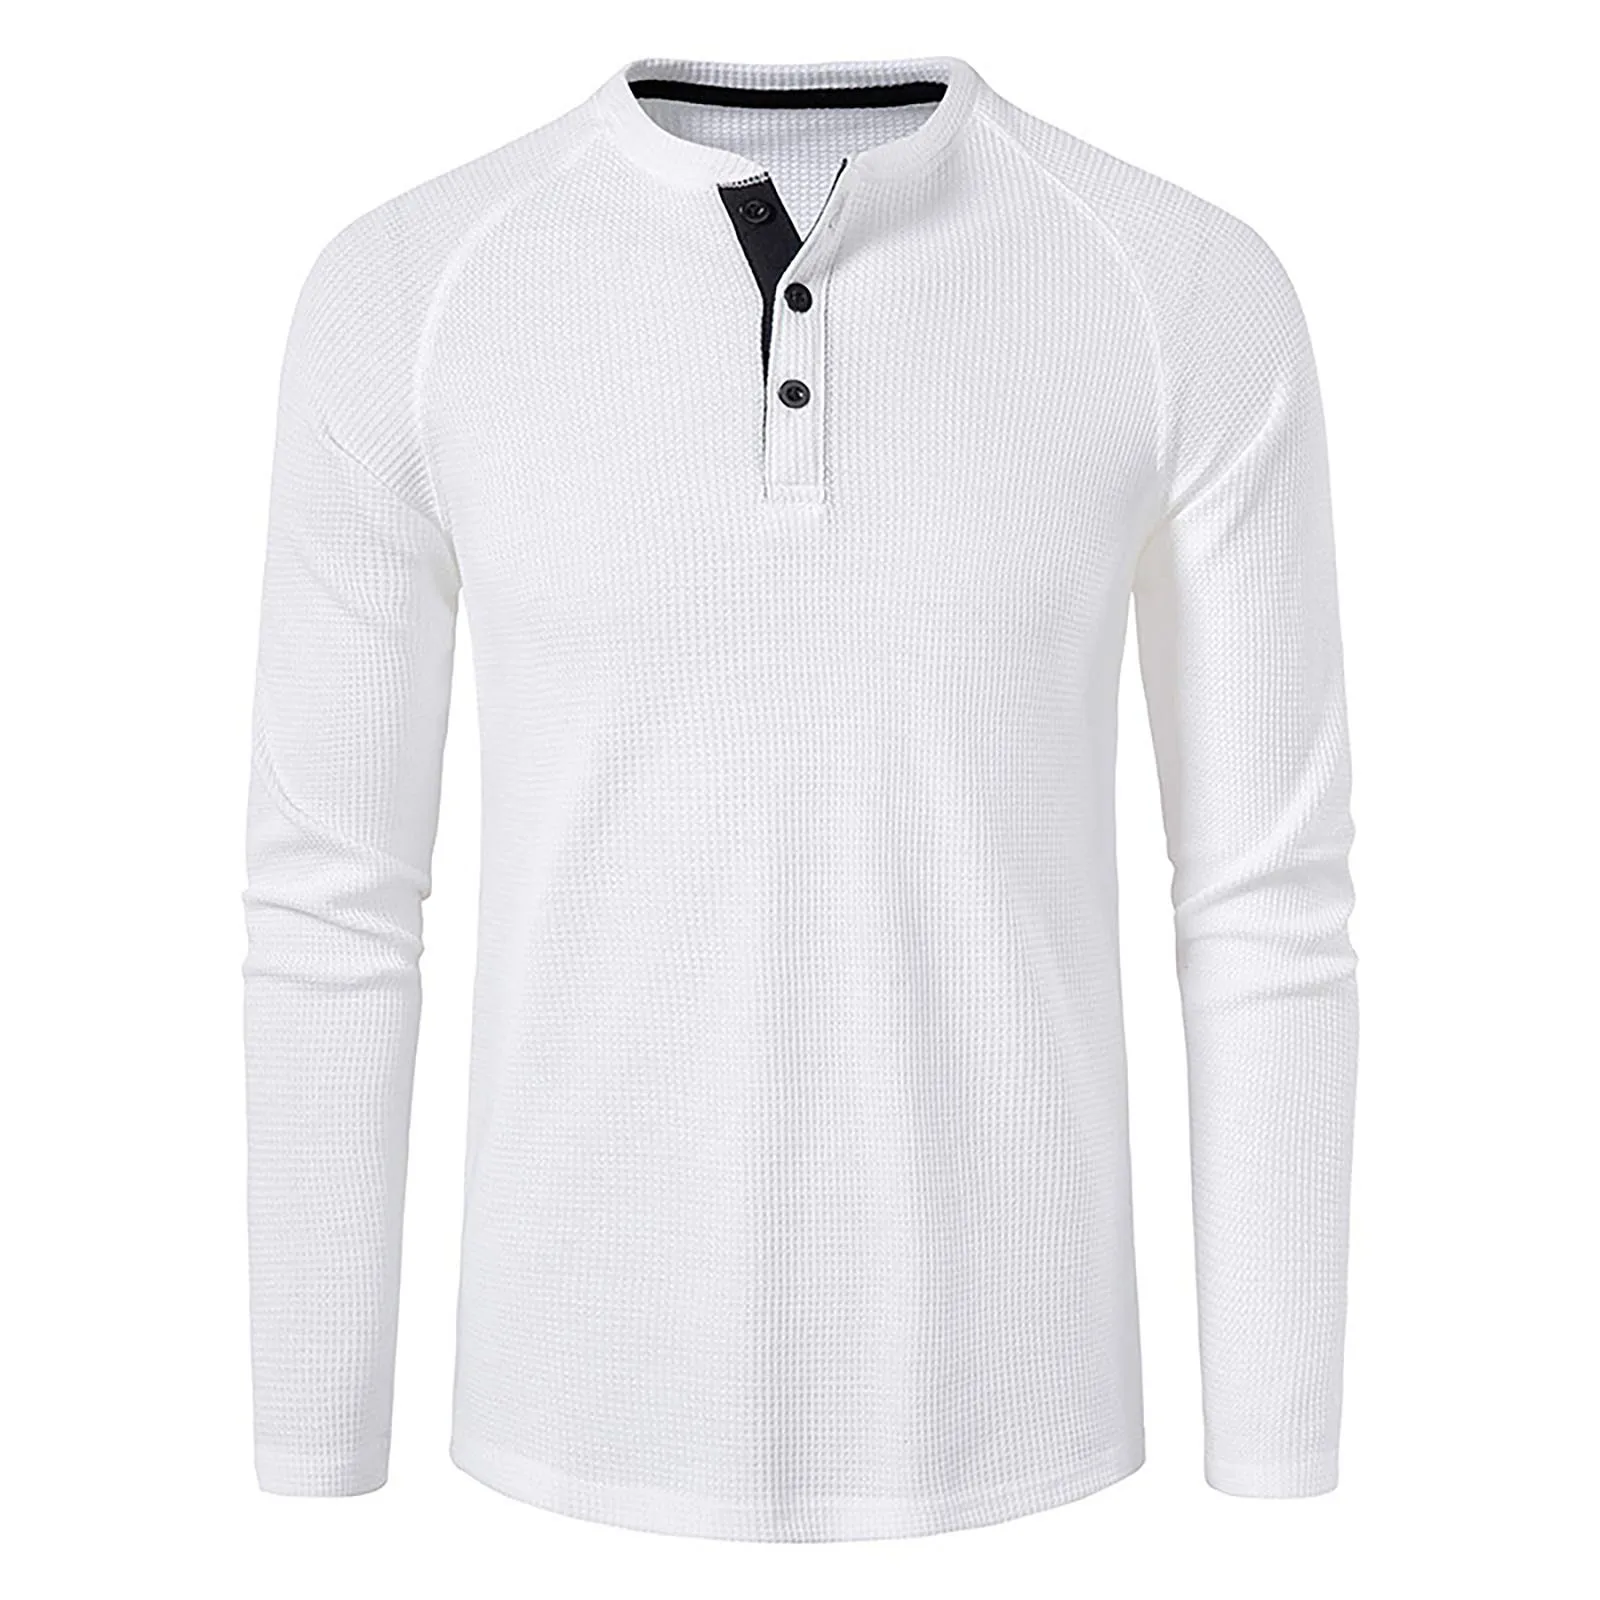 

New Spring Autumn Golf Brand 100%Cotton Men Women Round Neck High Quality Long Sleeve Casual Loose T-shirt Top S-5XL